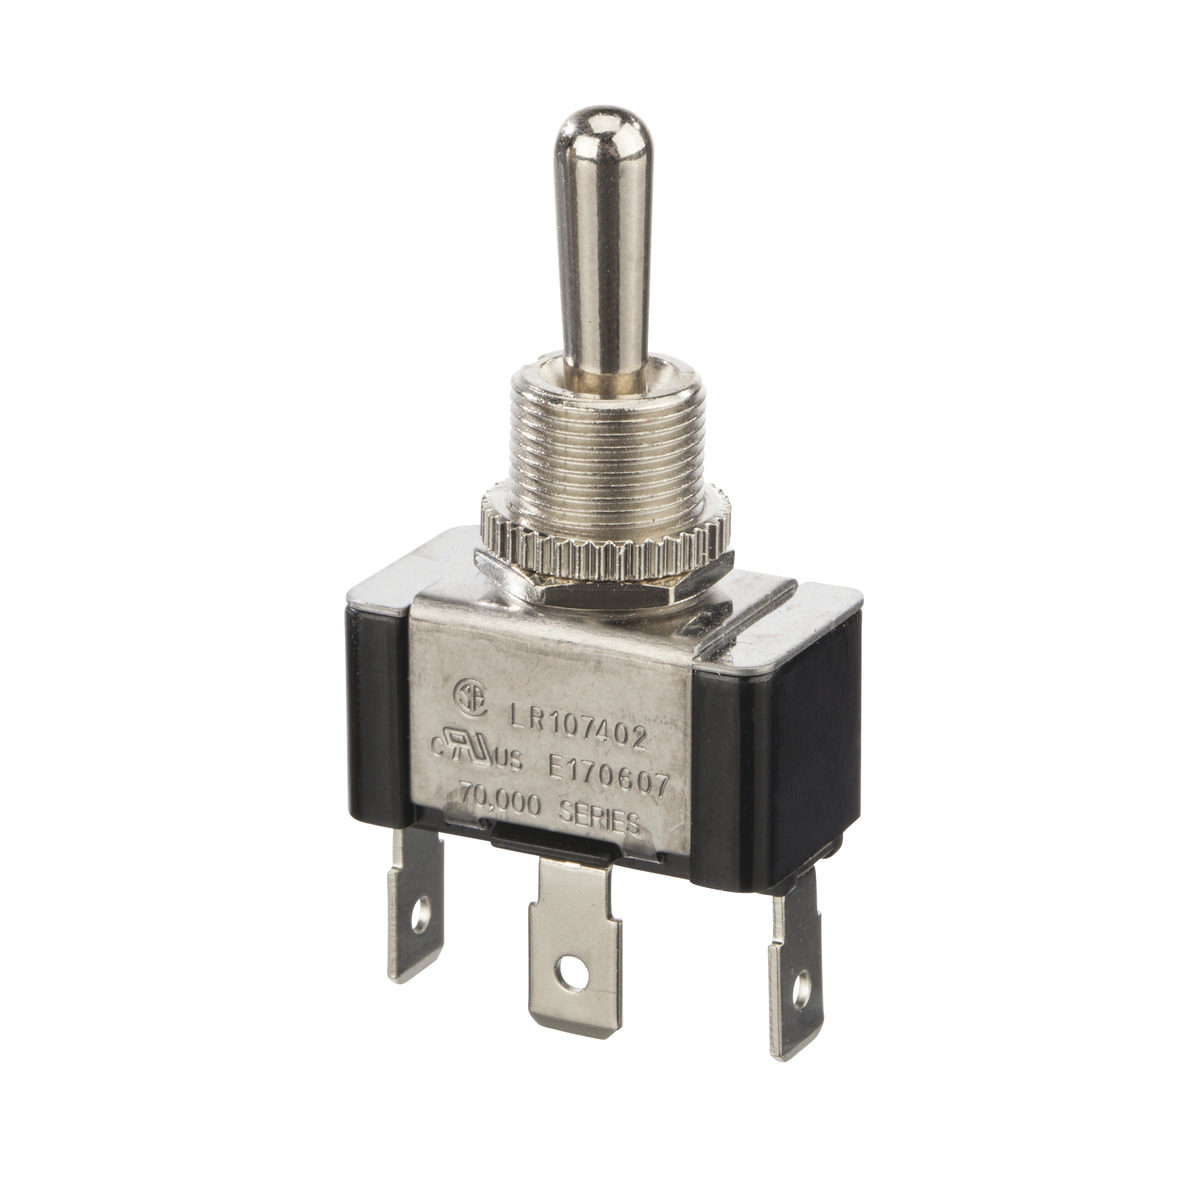 NSI 75111CQ Pull Chain Switch, Off-On-On-On Circuit Function, SP3T, Brass  Actuator, 6/3 amps at 125/250 VAC